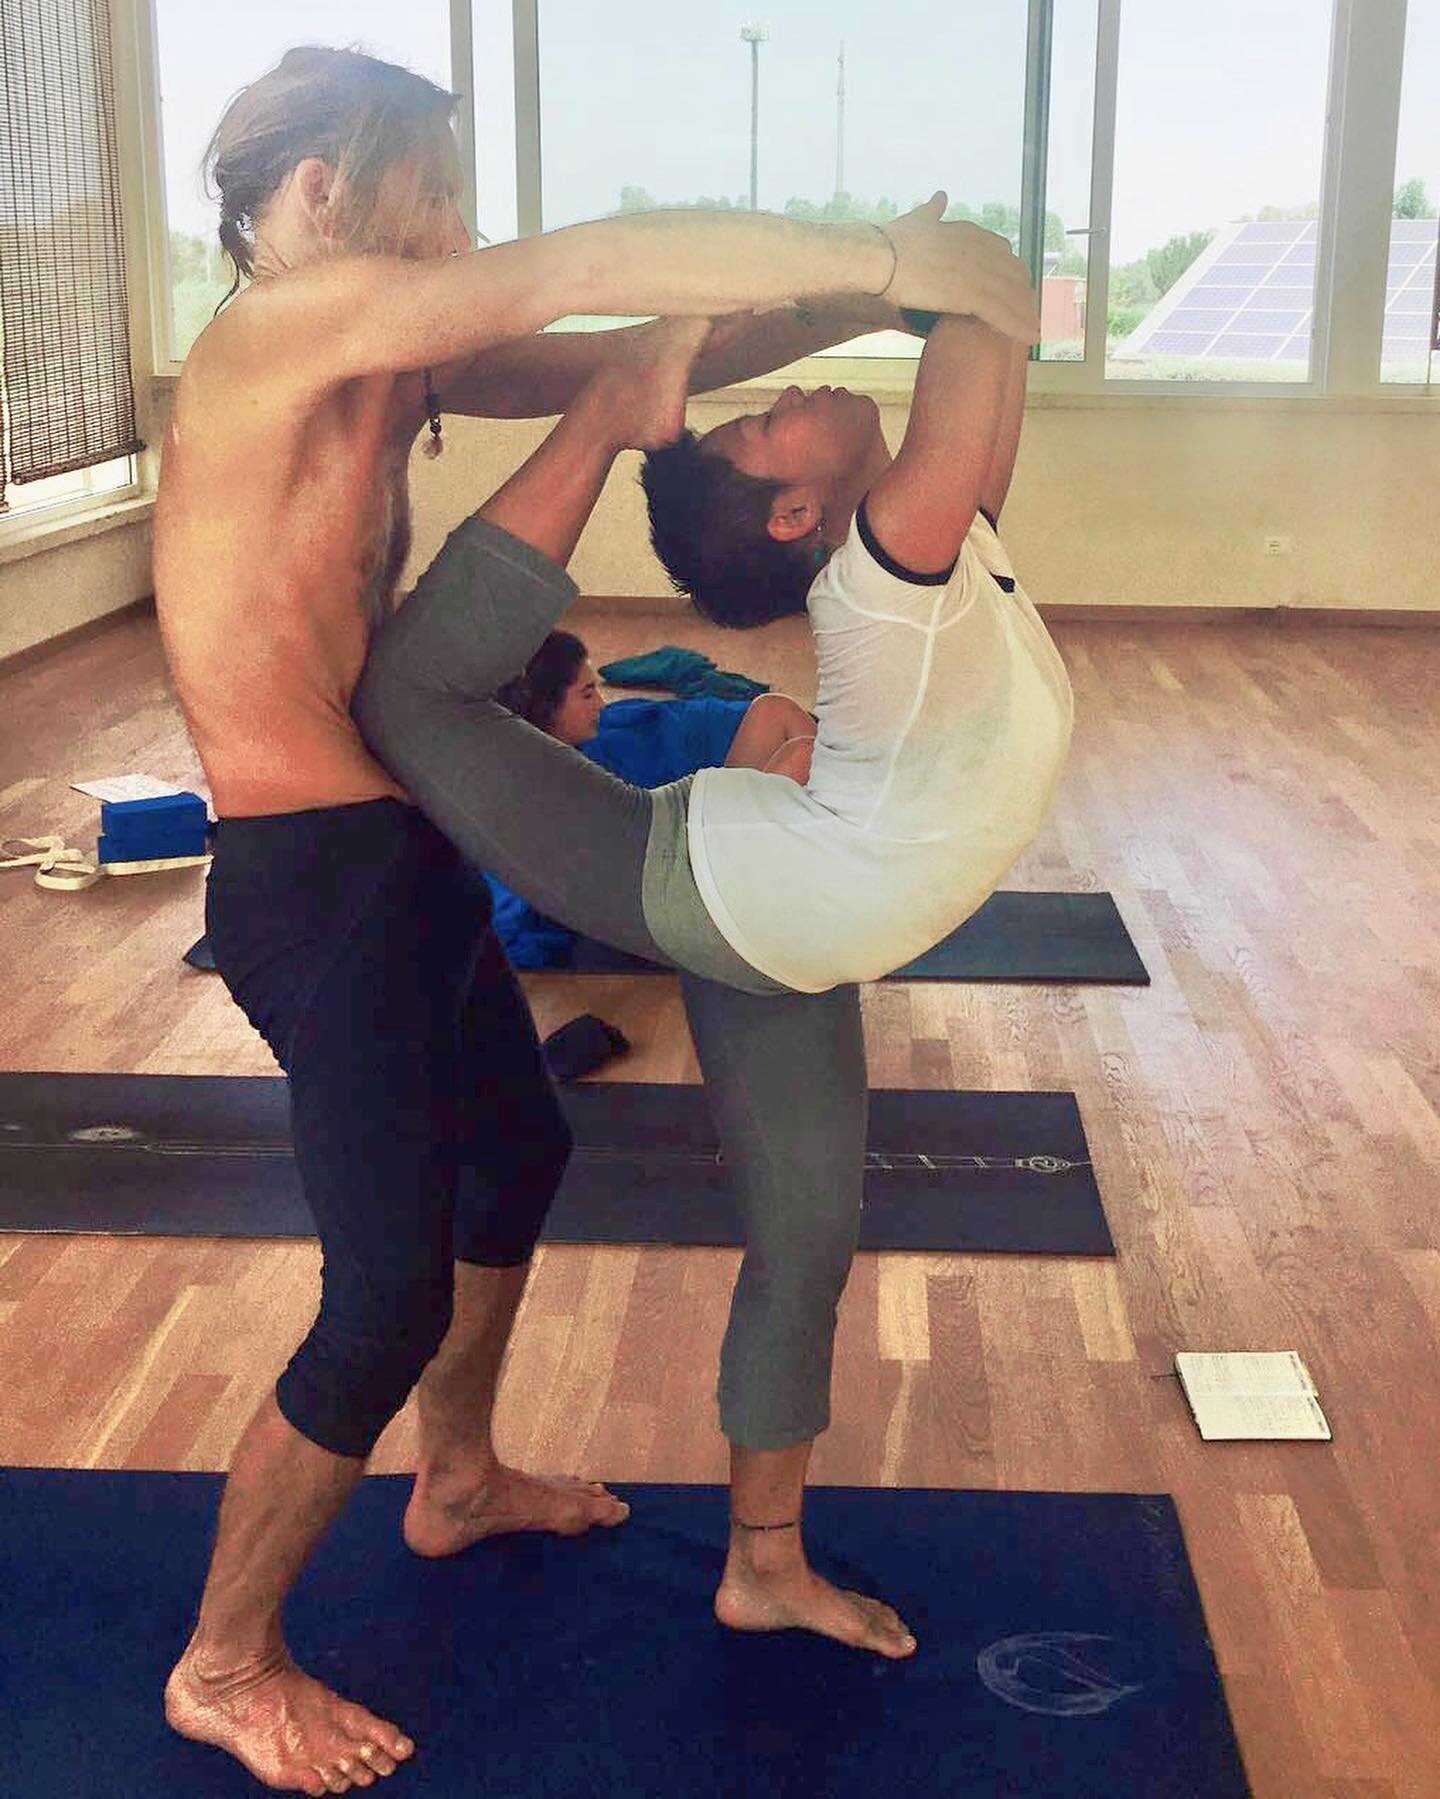 2023 Summer Ashtanga Vinyasa Yoga 50-hr CPD for teachers 

&ldquo;FROM ORDINARY TO EXTRAORDINARY&rsquo;&rsquo;

In affiliation with the Ashtanga Vinyasa Yoga Research Community (AVYRC), in the teachings of John Scott and Manju Jois, the lineage of Sr